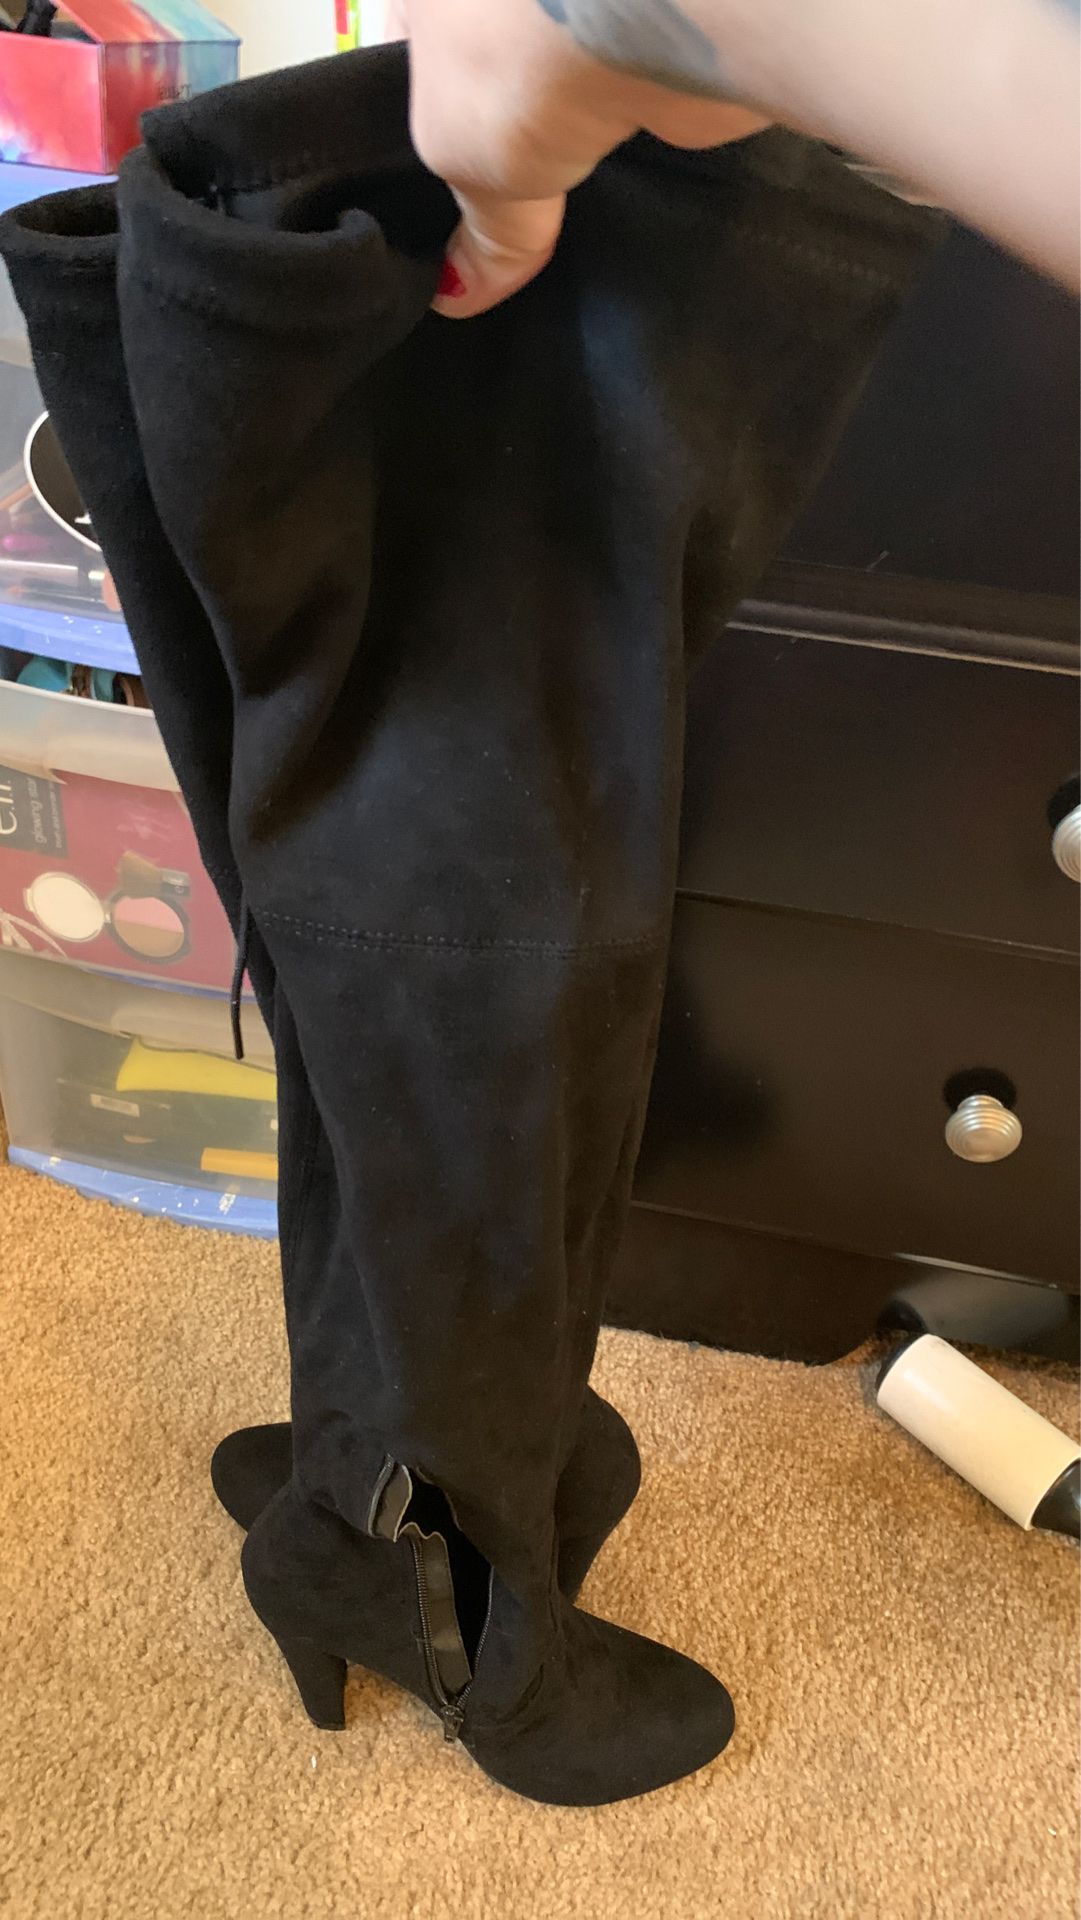 Size 7 thigh high boots